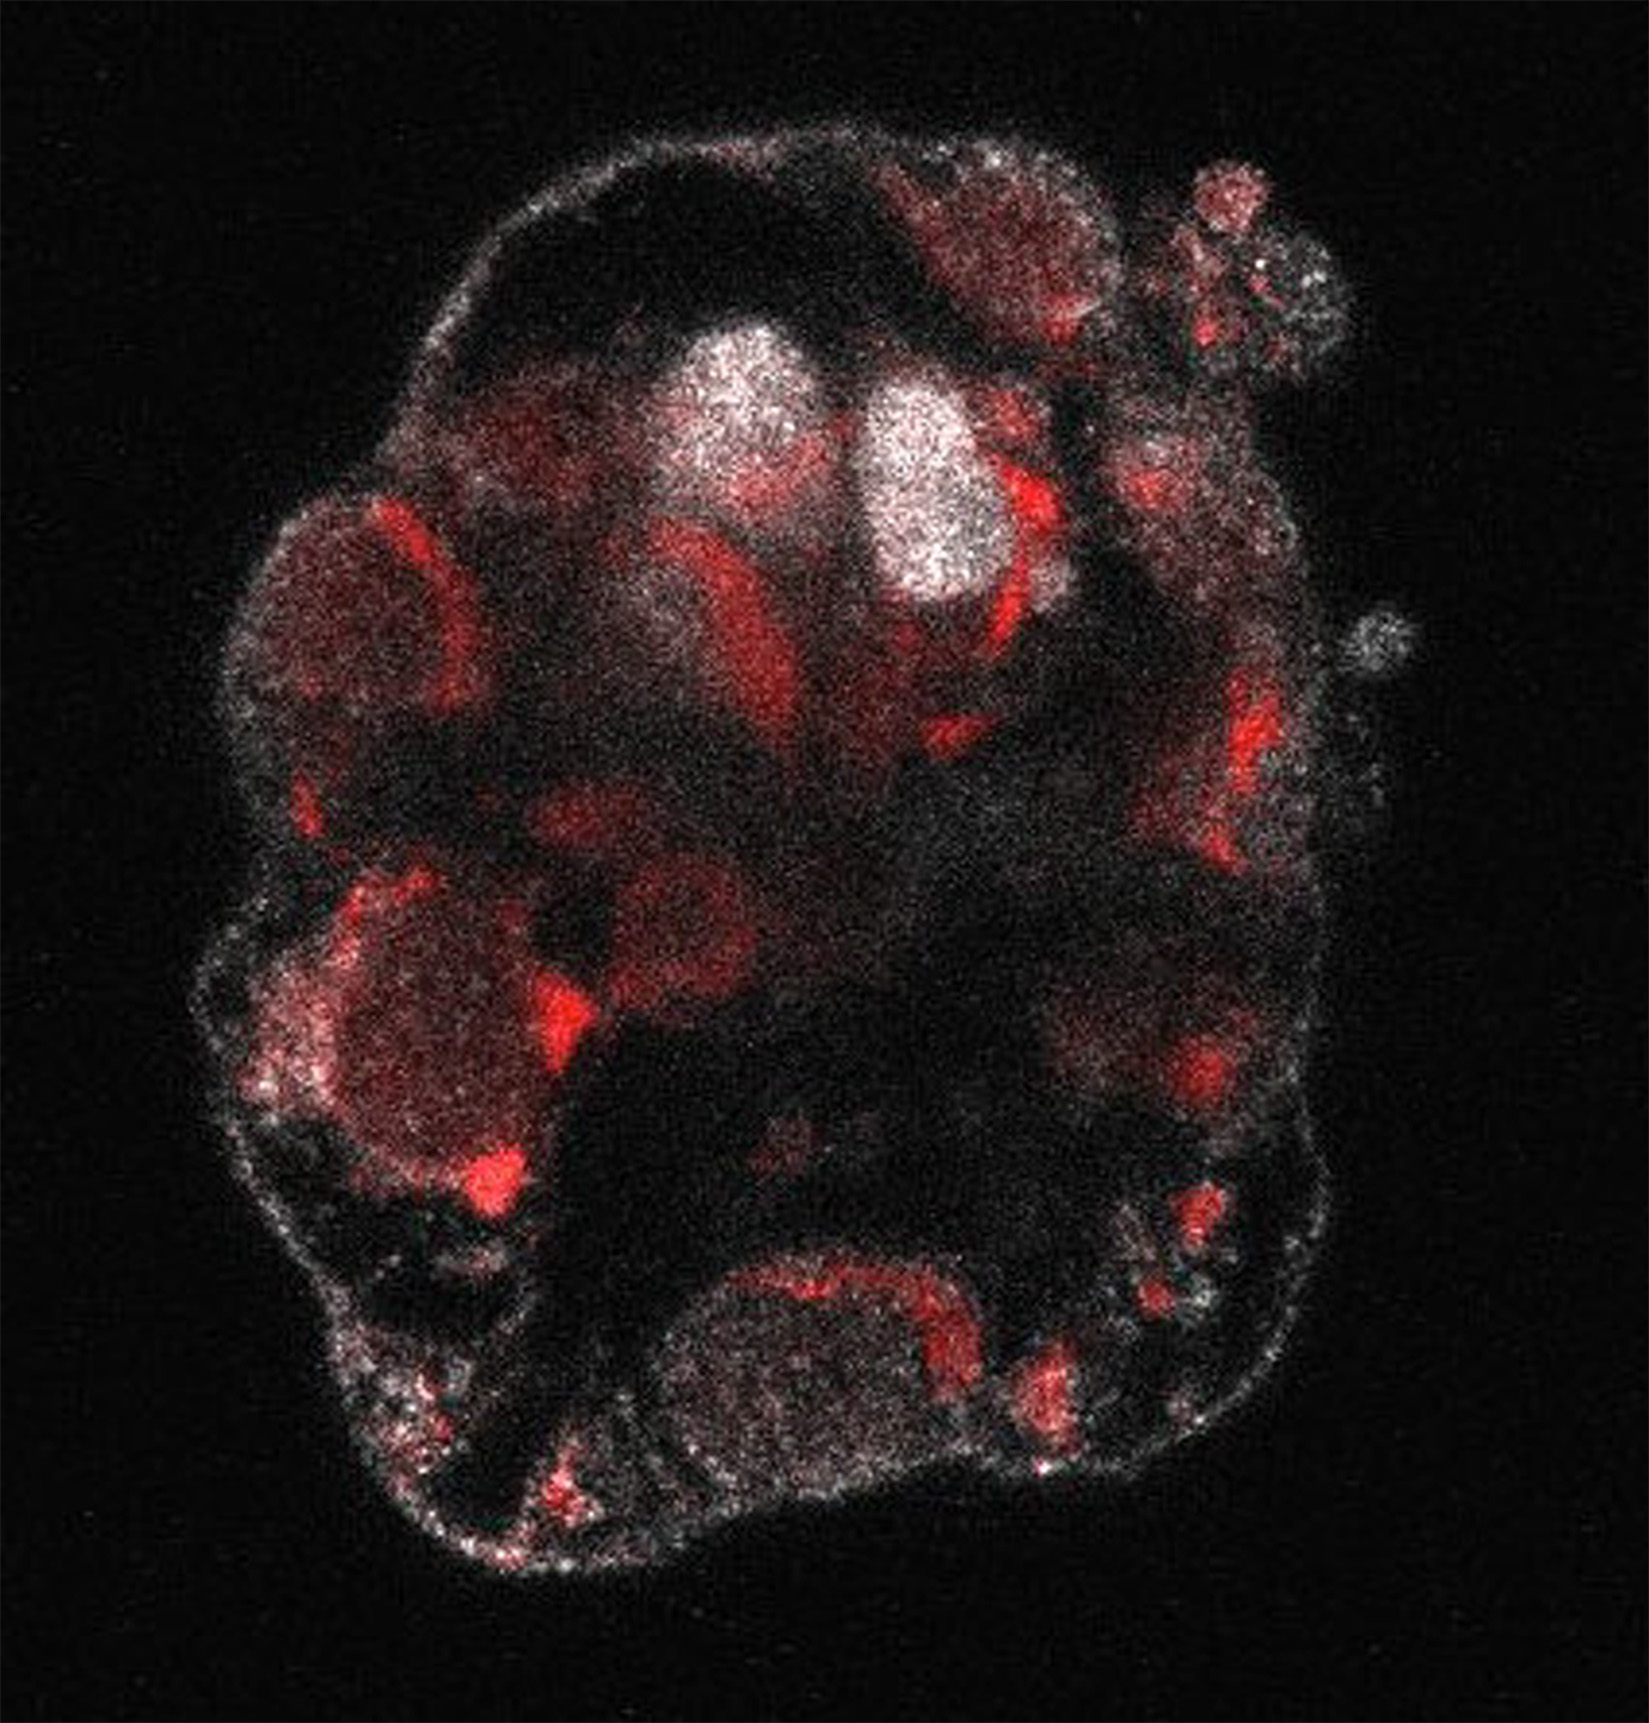 A micrograph shows a clumpy gray collection of epiblast cells — cells that would normally grow into a fetus — that are infected with Zika virus, seen as red splotches in the image.